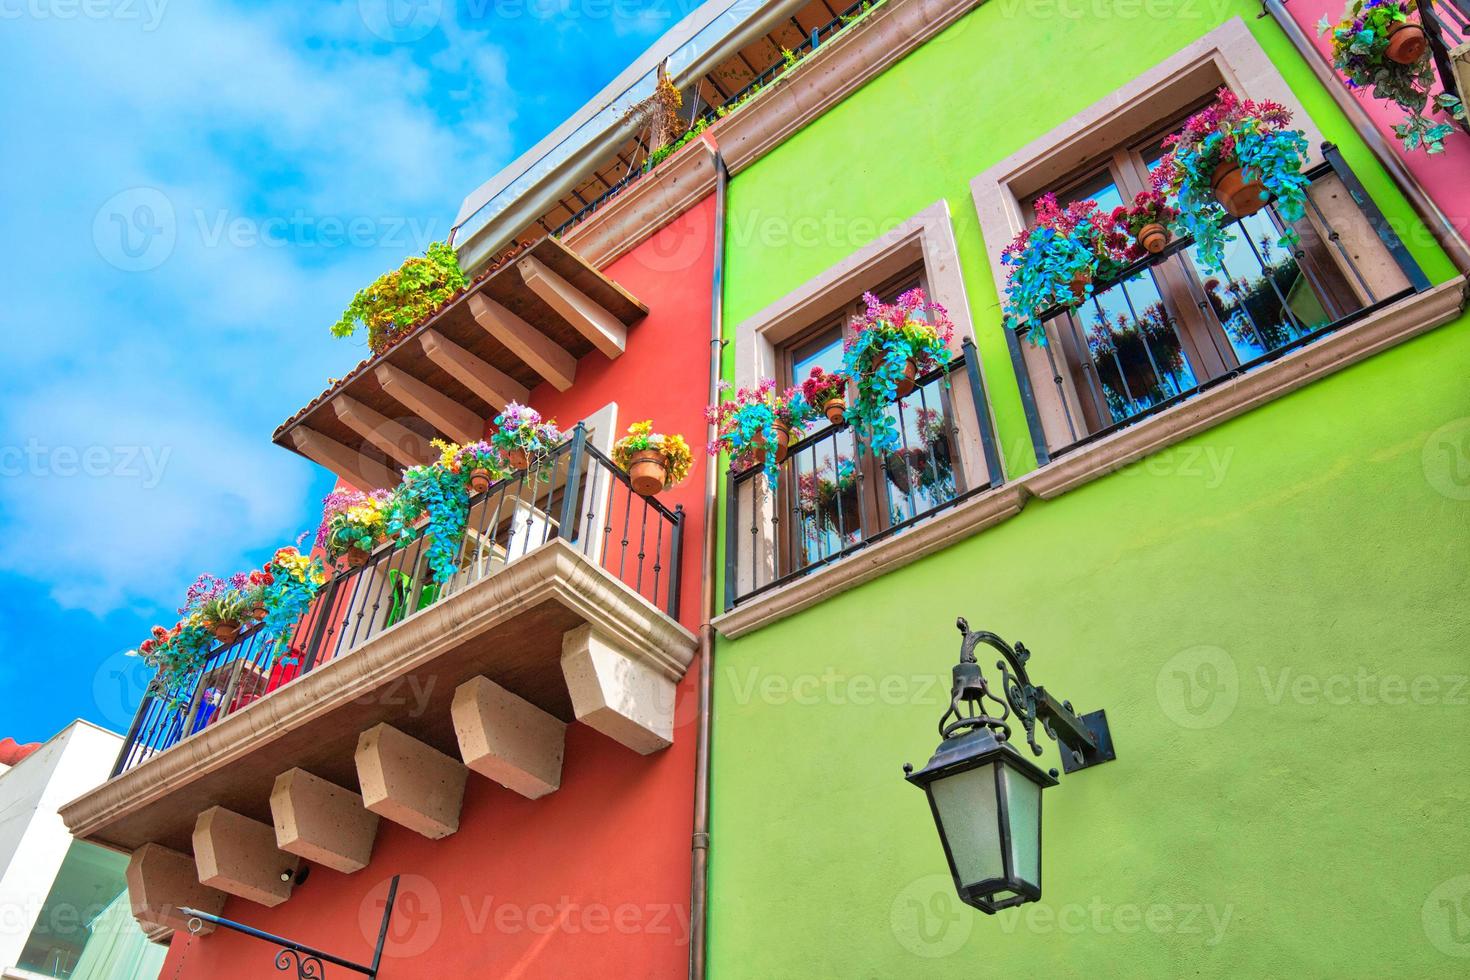 Monterrey, colorful historic buildings in the center of the old city Barrio Antiguo at a peak tourist season photo